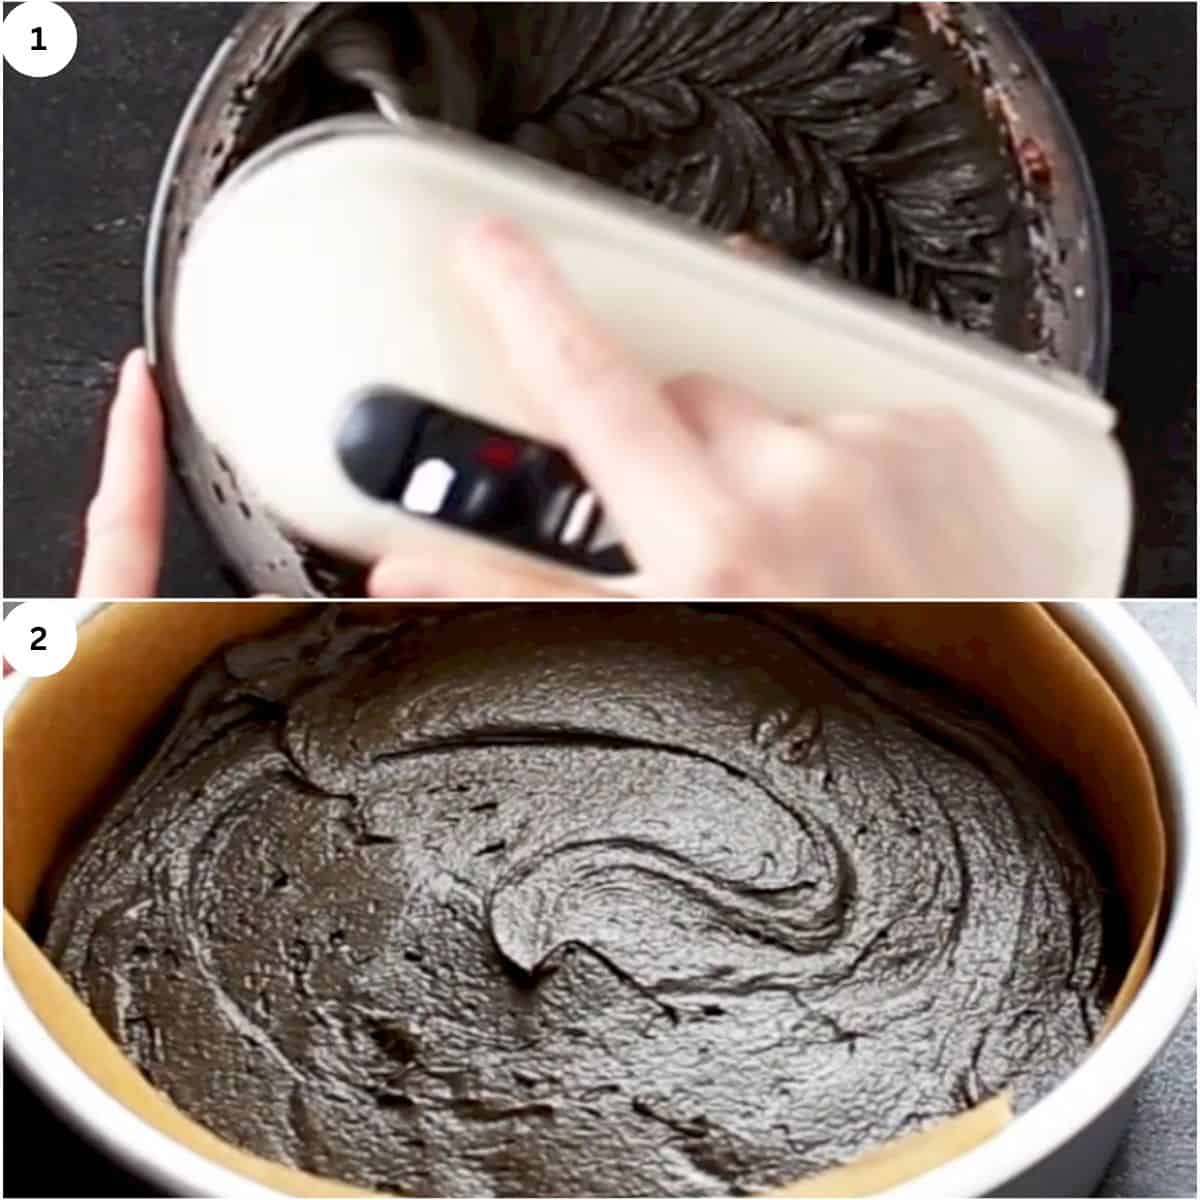 mixing batter by hand mixer and baking cake